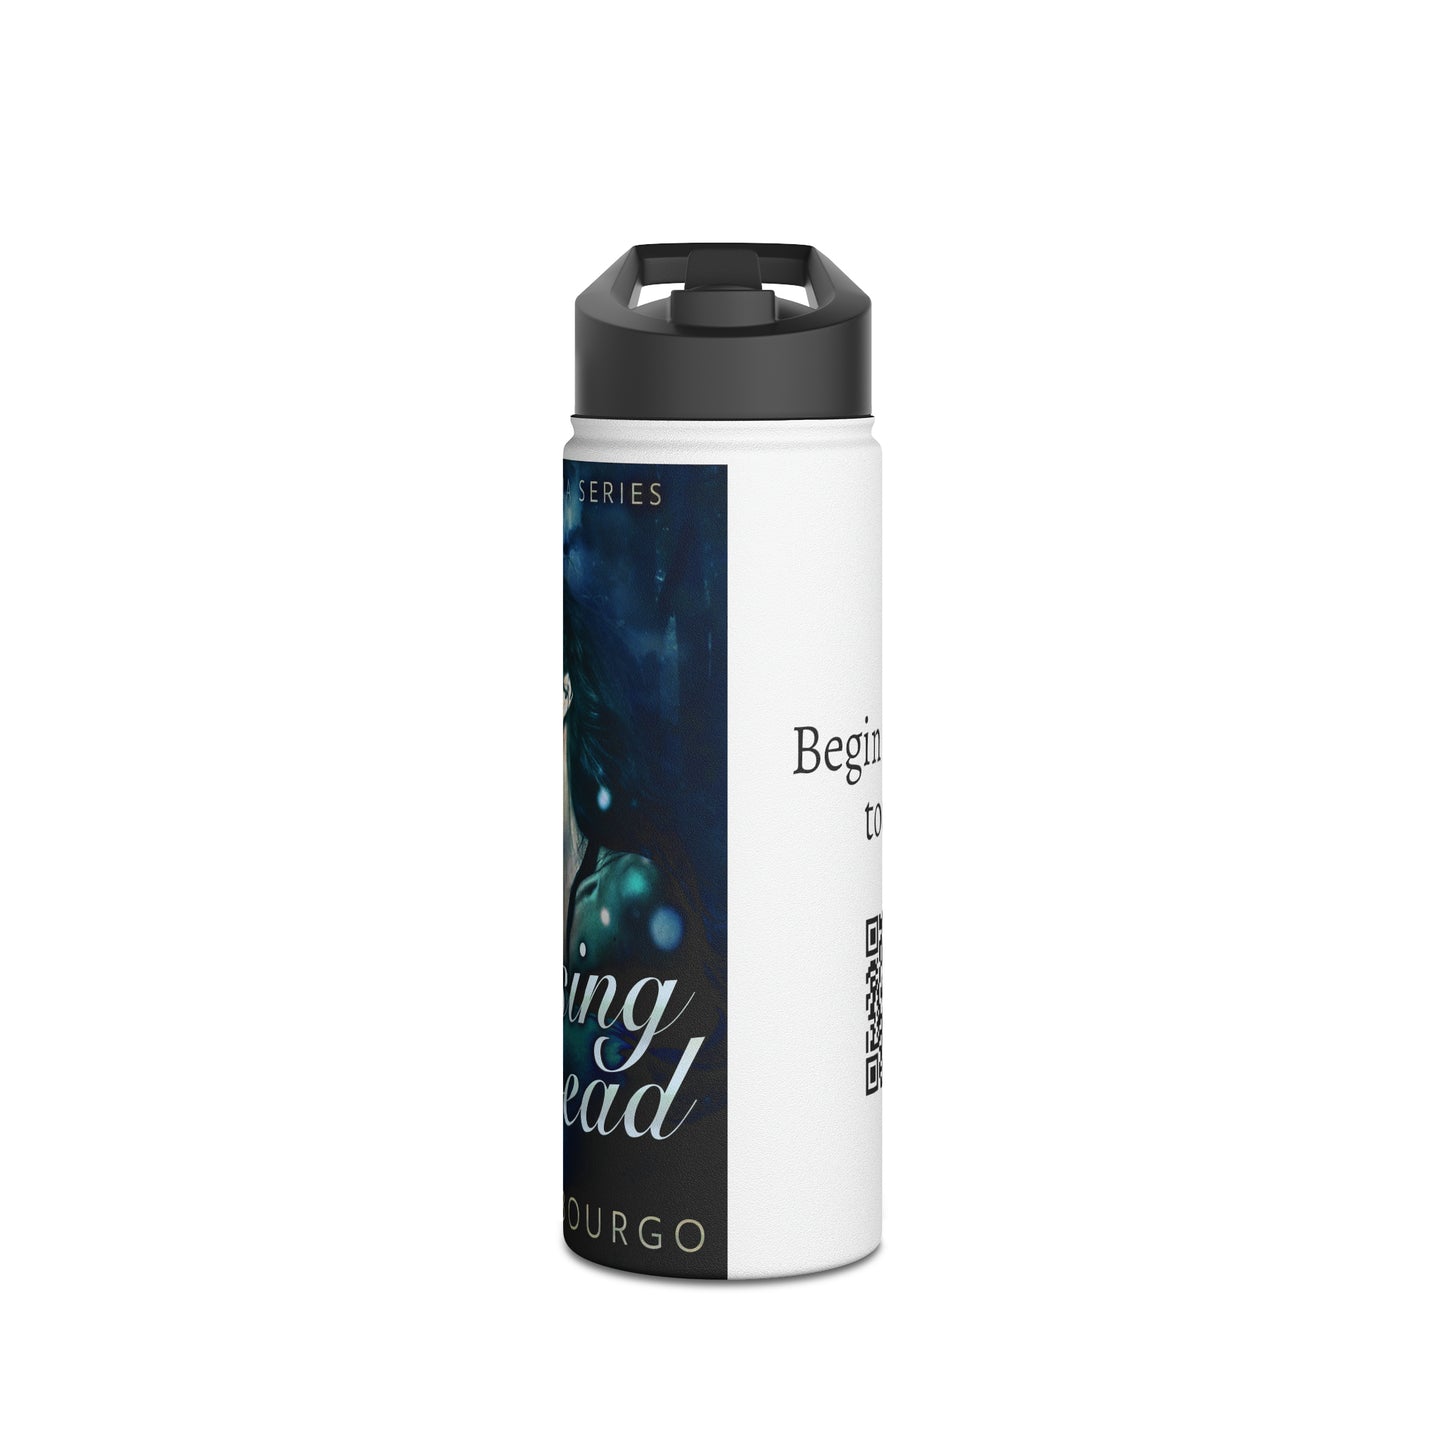 Missing Thread - Stainless Steel Water Bottle